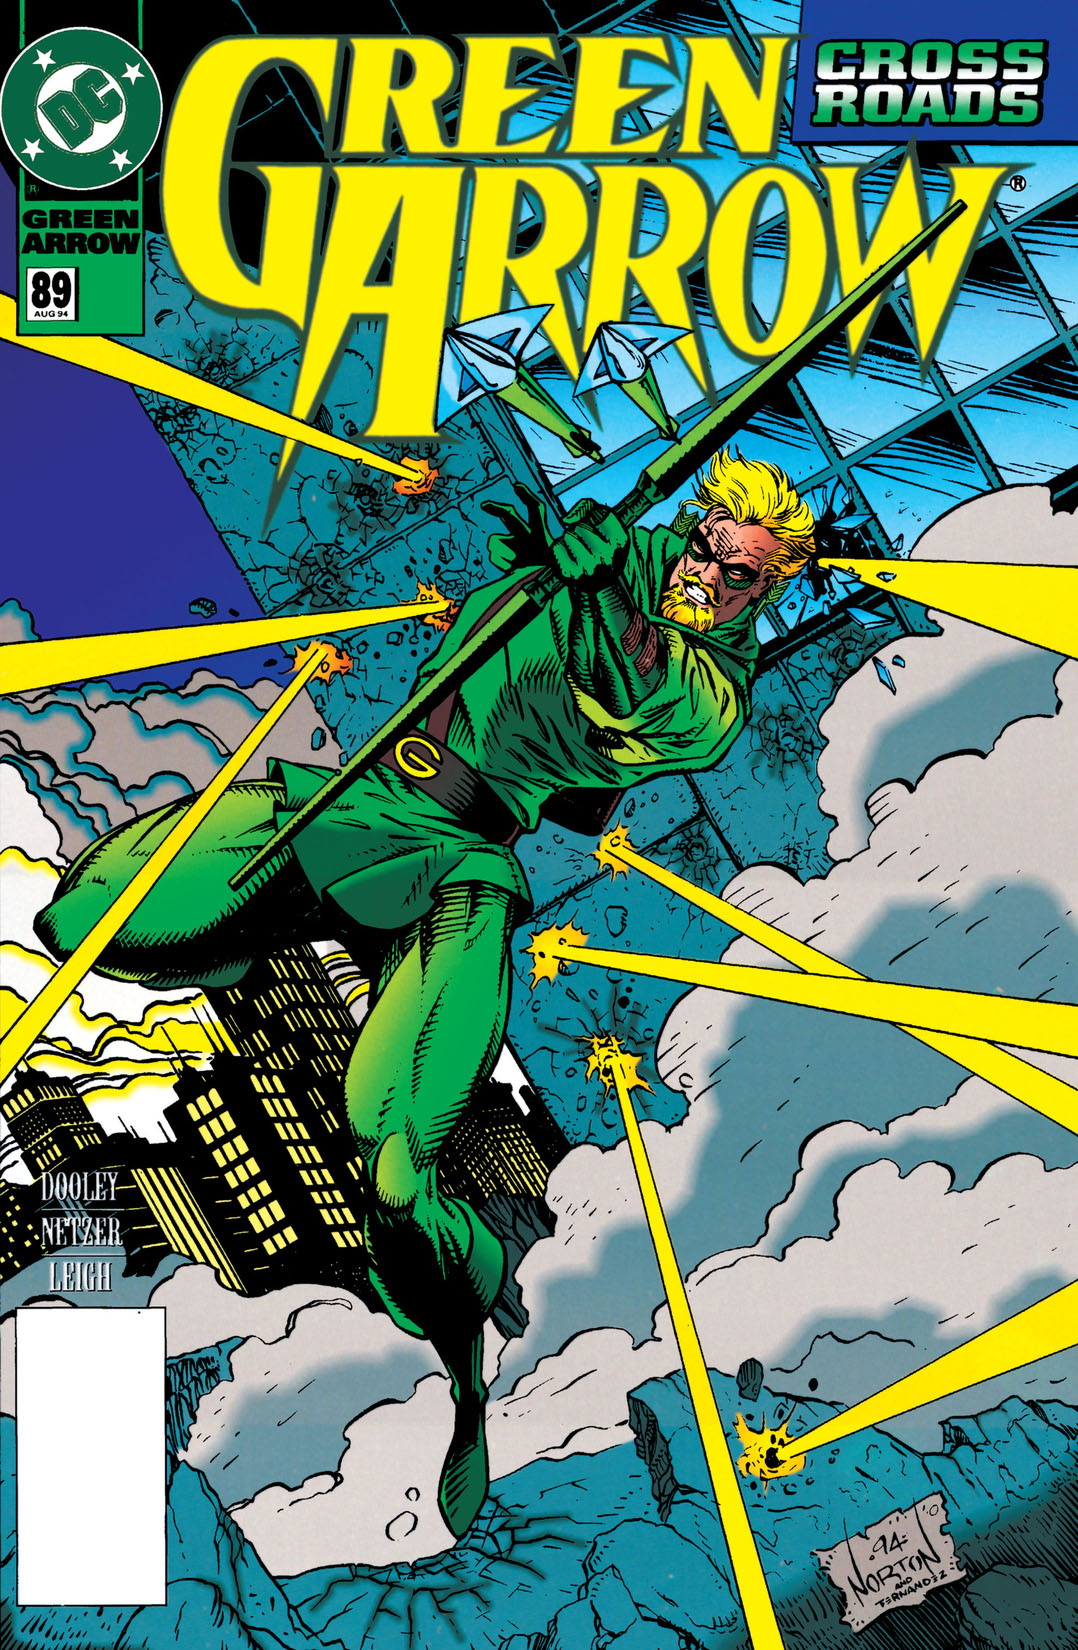 Green Arrow (1987-1998) #89 preview images